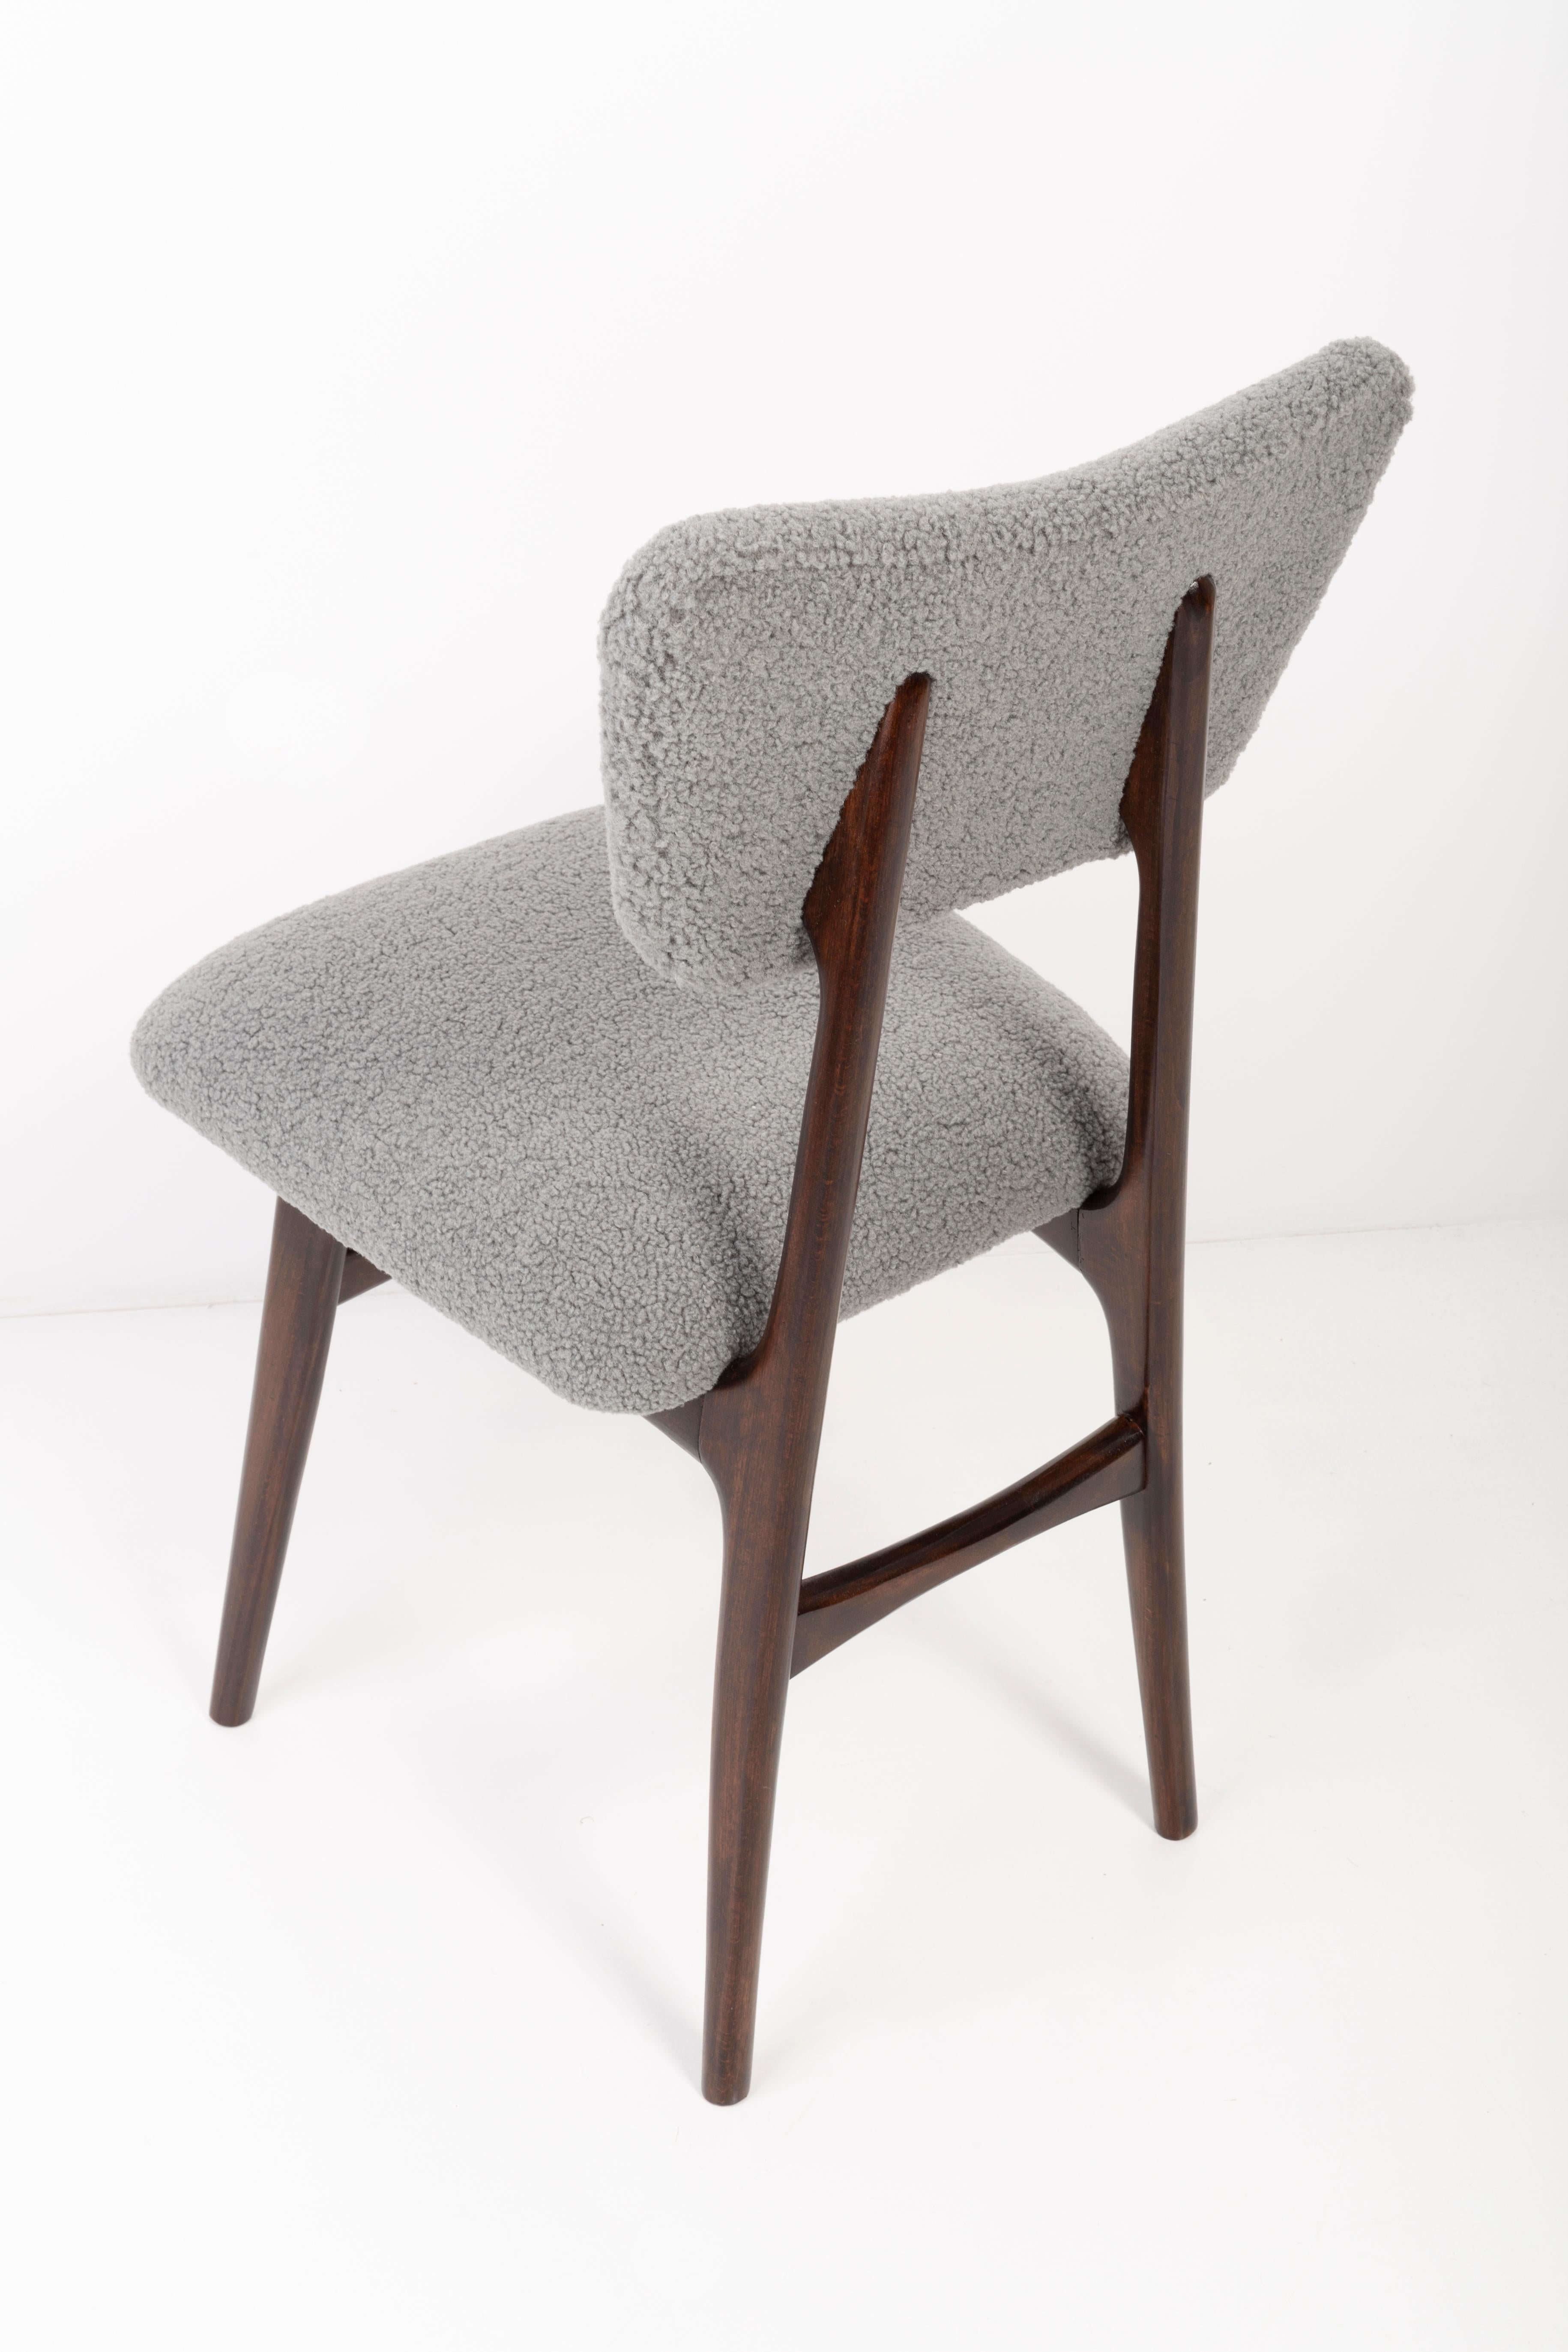 Set of Four 20th Century Gray Boucle Chairs, 1960s For Sale 4